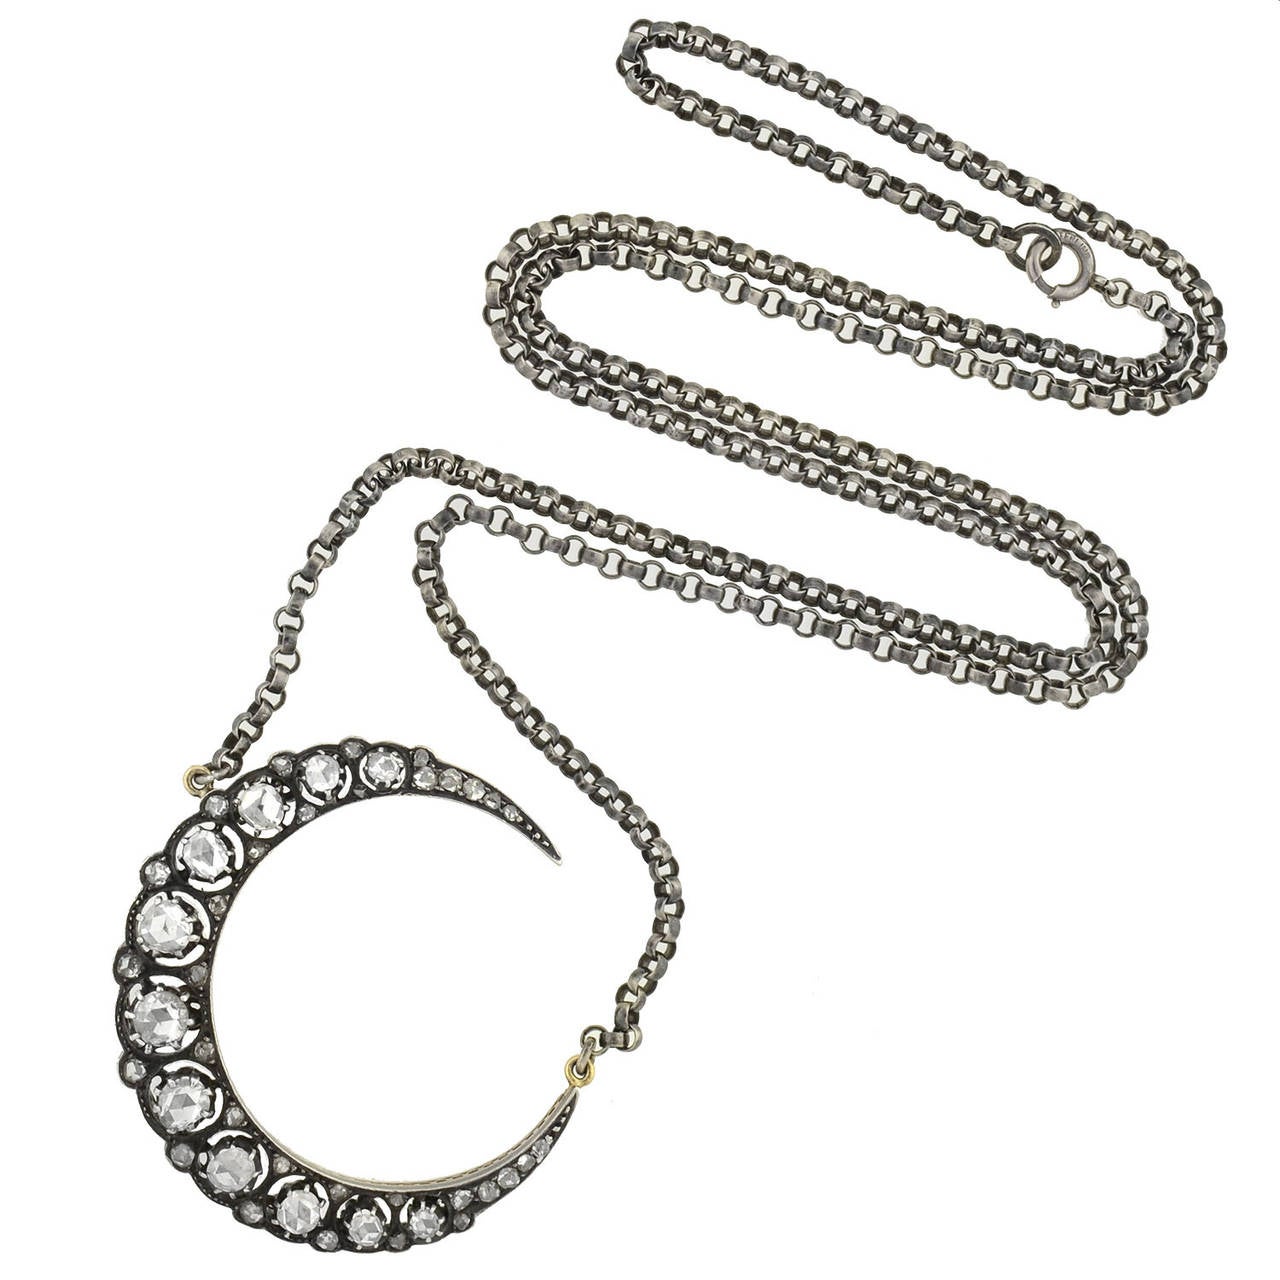 A magnificent diamond crescent necklace from the Victorian era (ca1880)! Made of sterling-topped 15kt gold, the necklace is comprised of a dazzling crescent moon pendant that hangs from a long sterling chain. The crescent is lined with beautiful